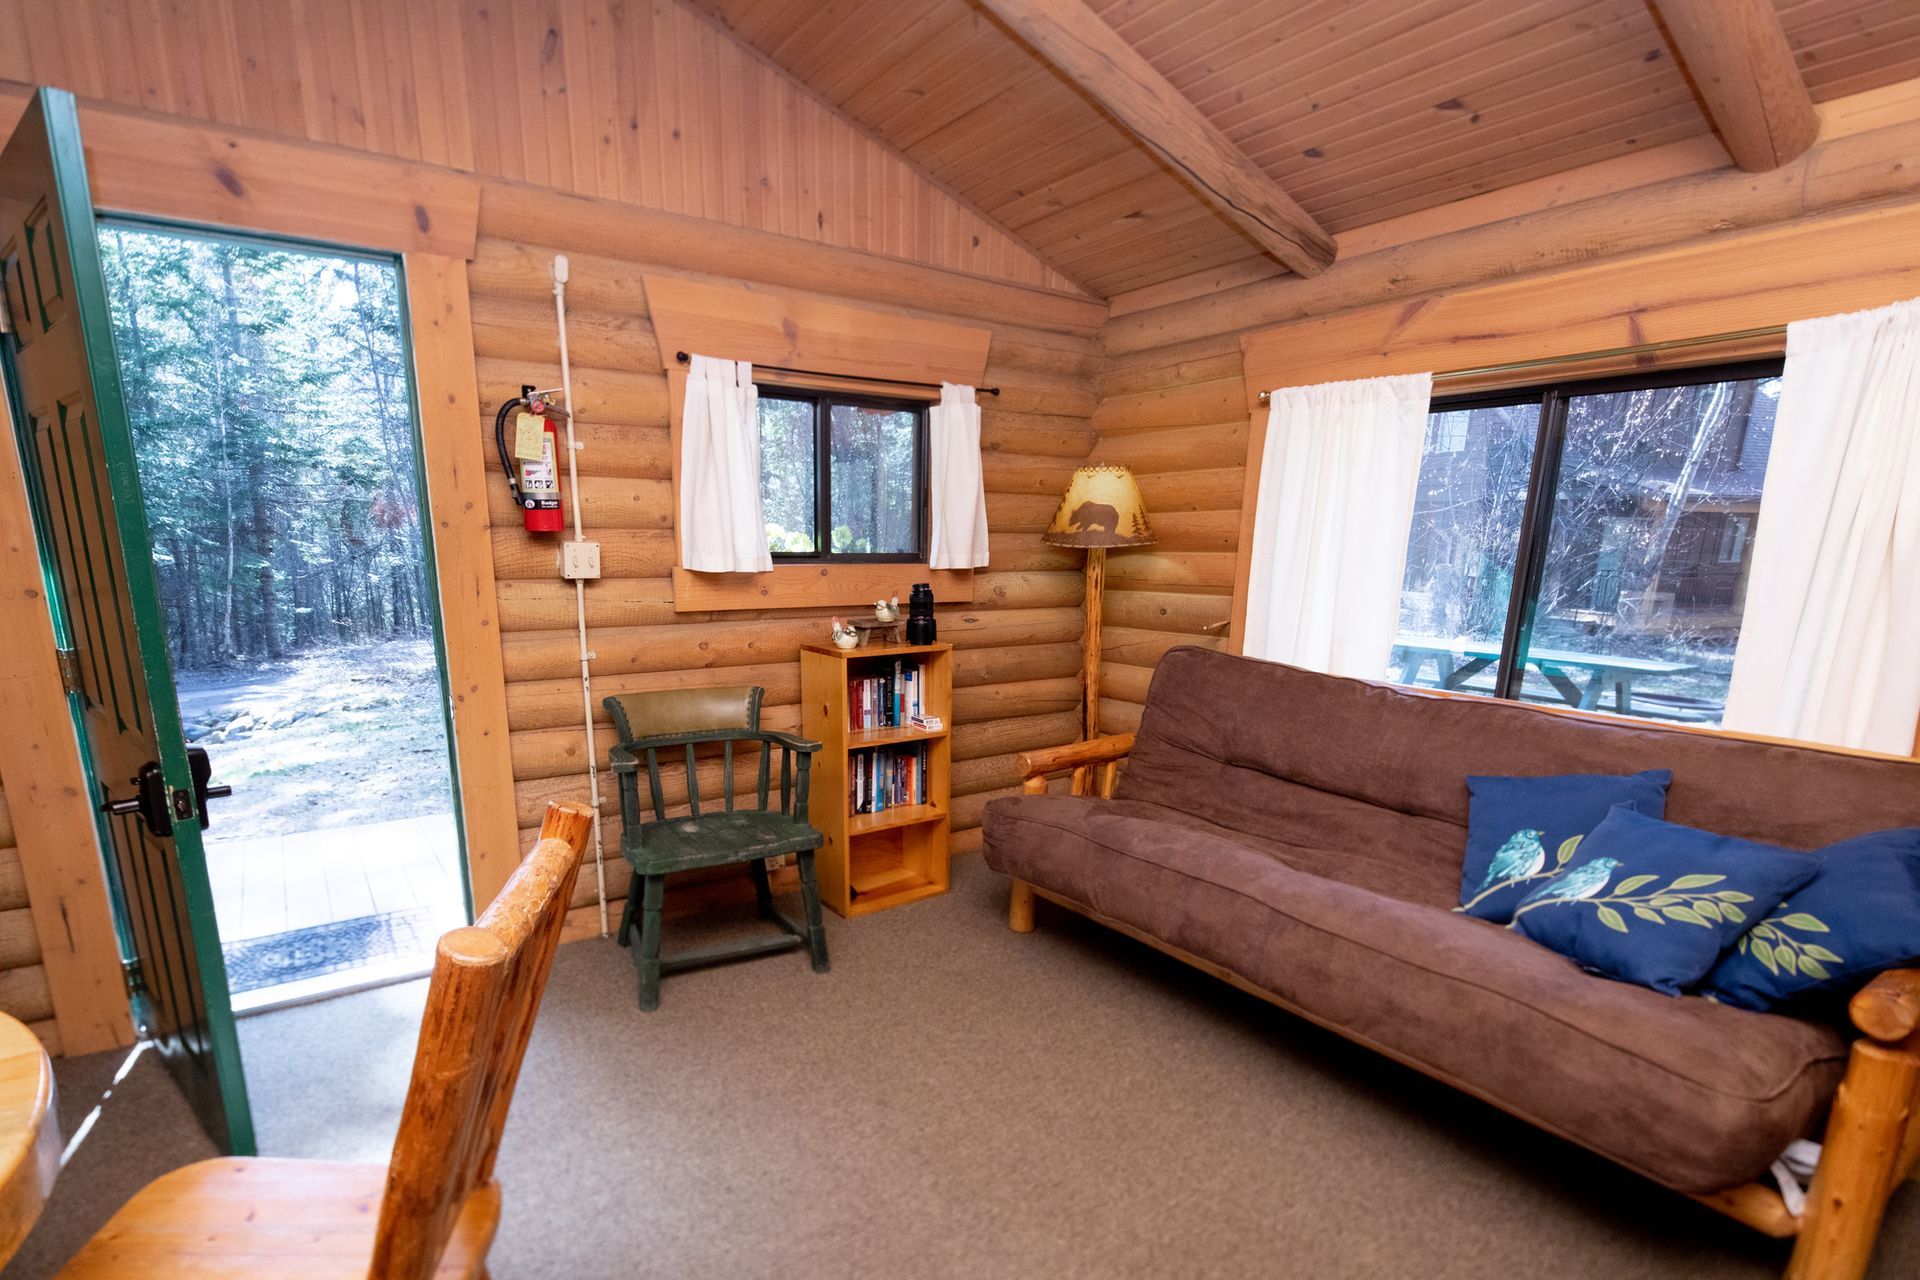 A living room in a log cabin with a couch and chairs